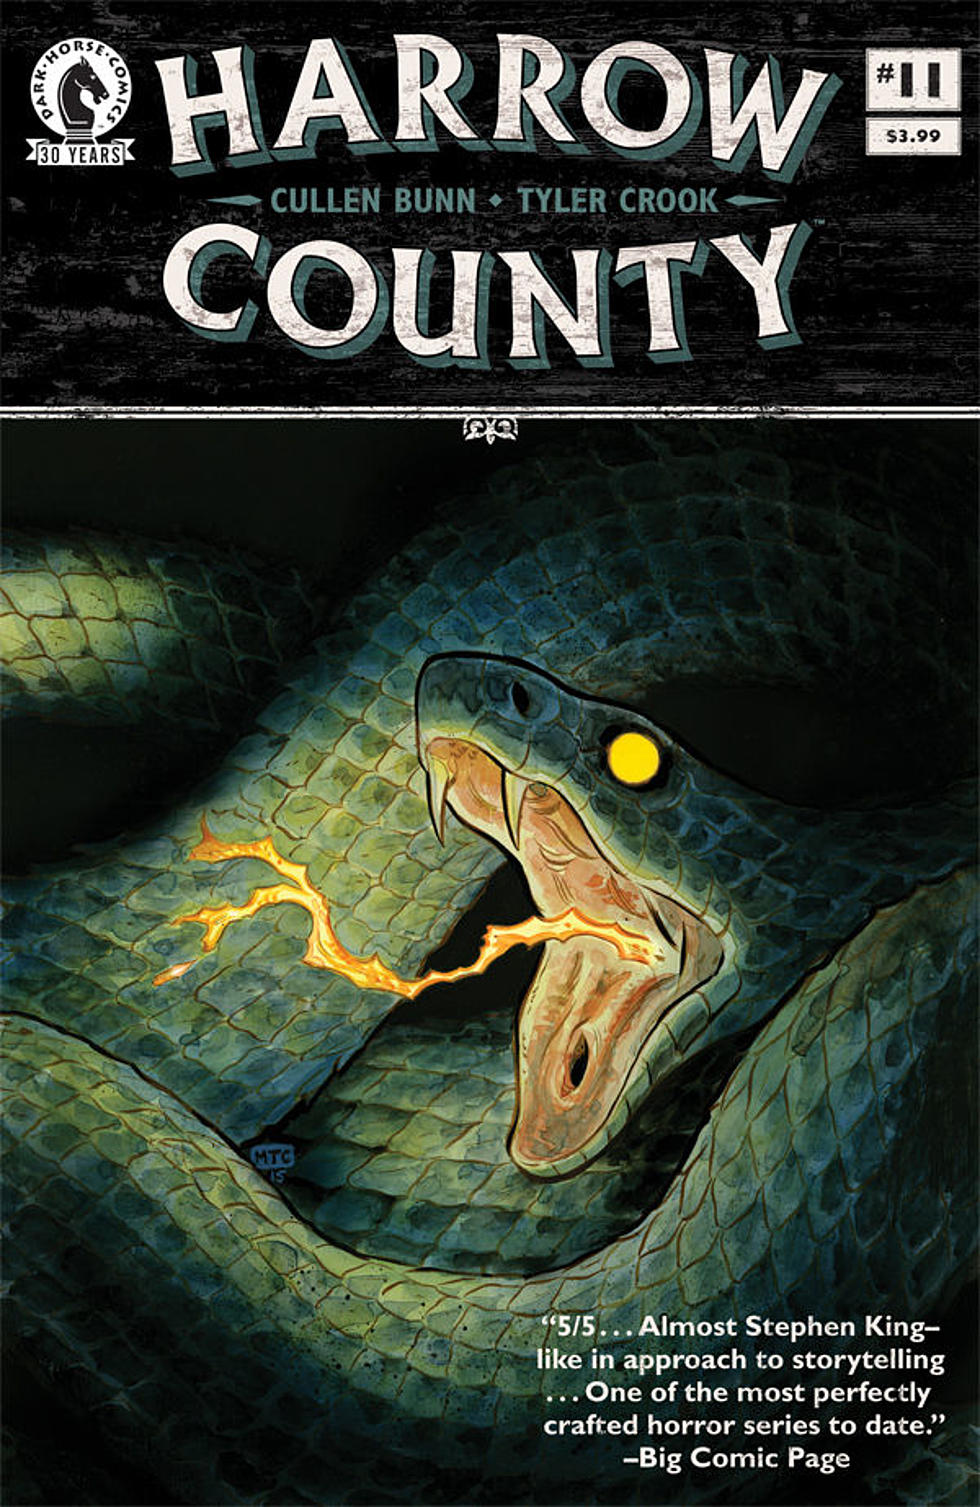 Love Every Part Of Making Comics: Tyler Crook On His Art Process For &#8216;Harrow County&#8217;